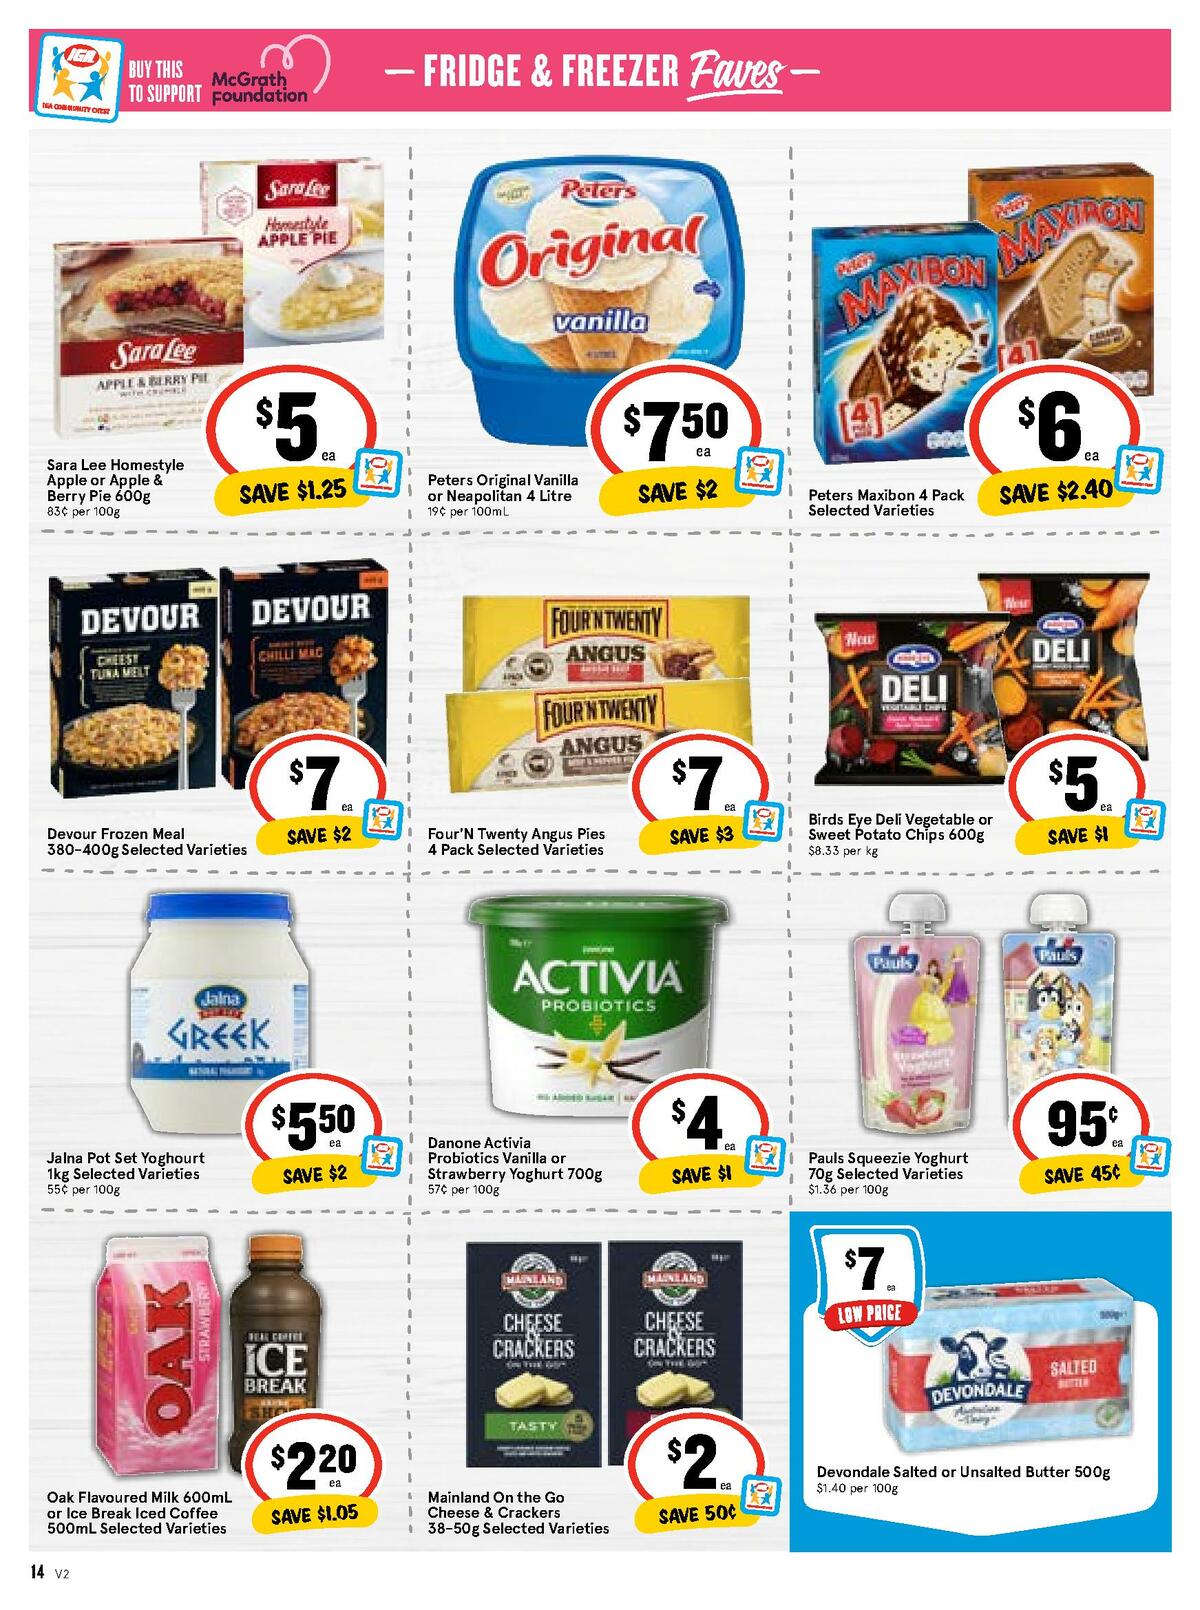 IGA Catalogues from 14 October